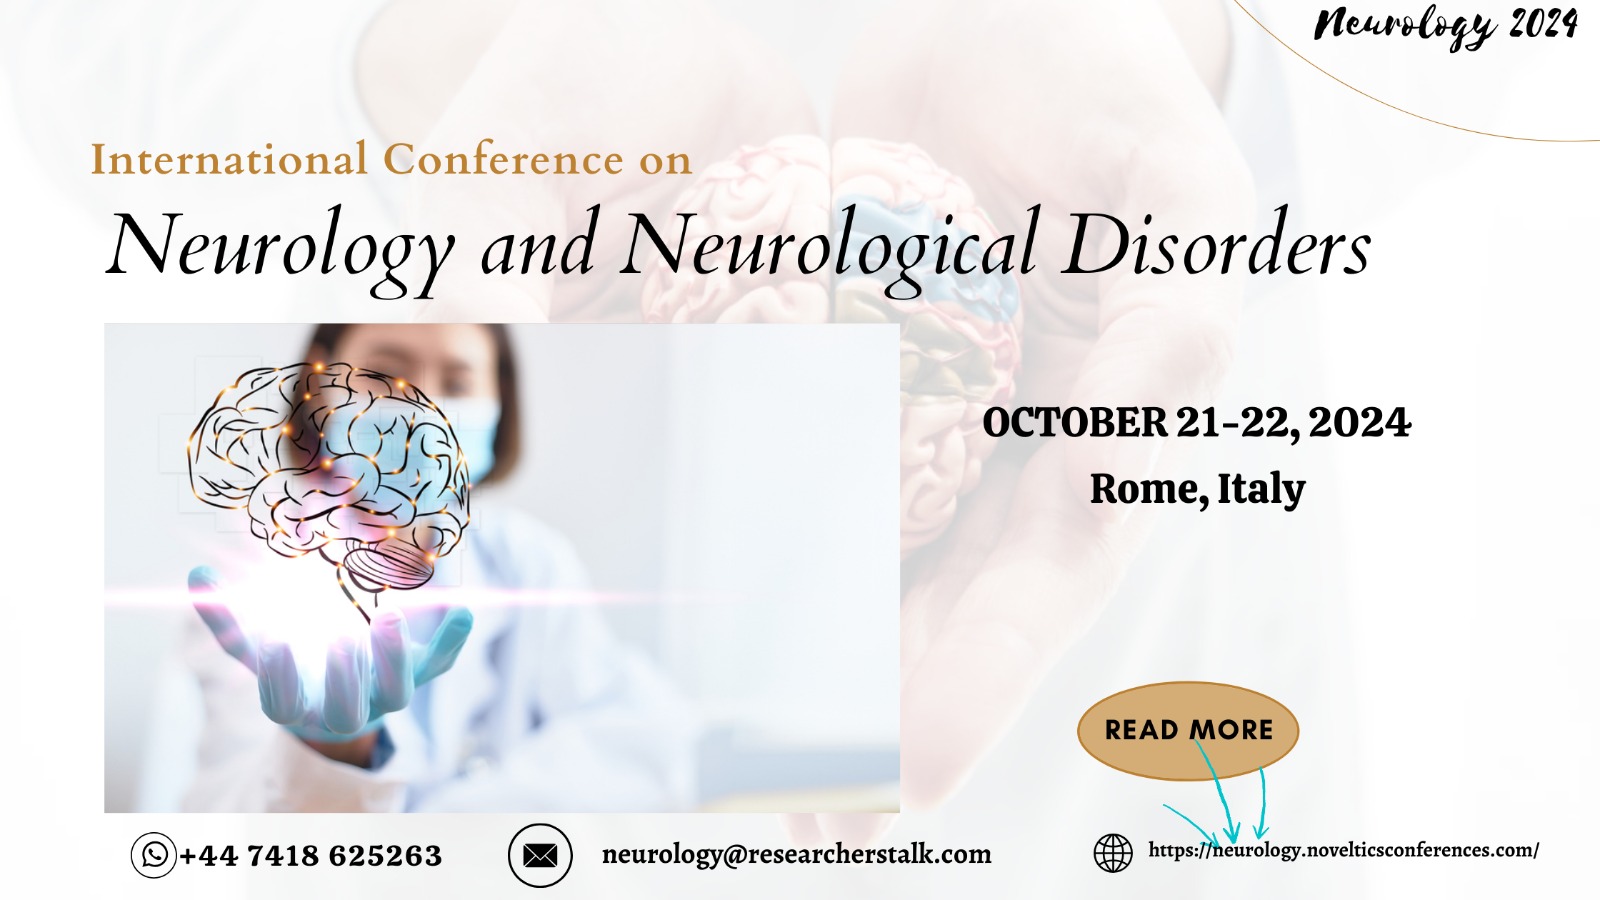 International Conference on Neurology and Neurological Disorders, Rome, Italy